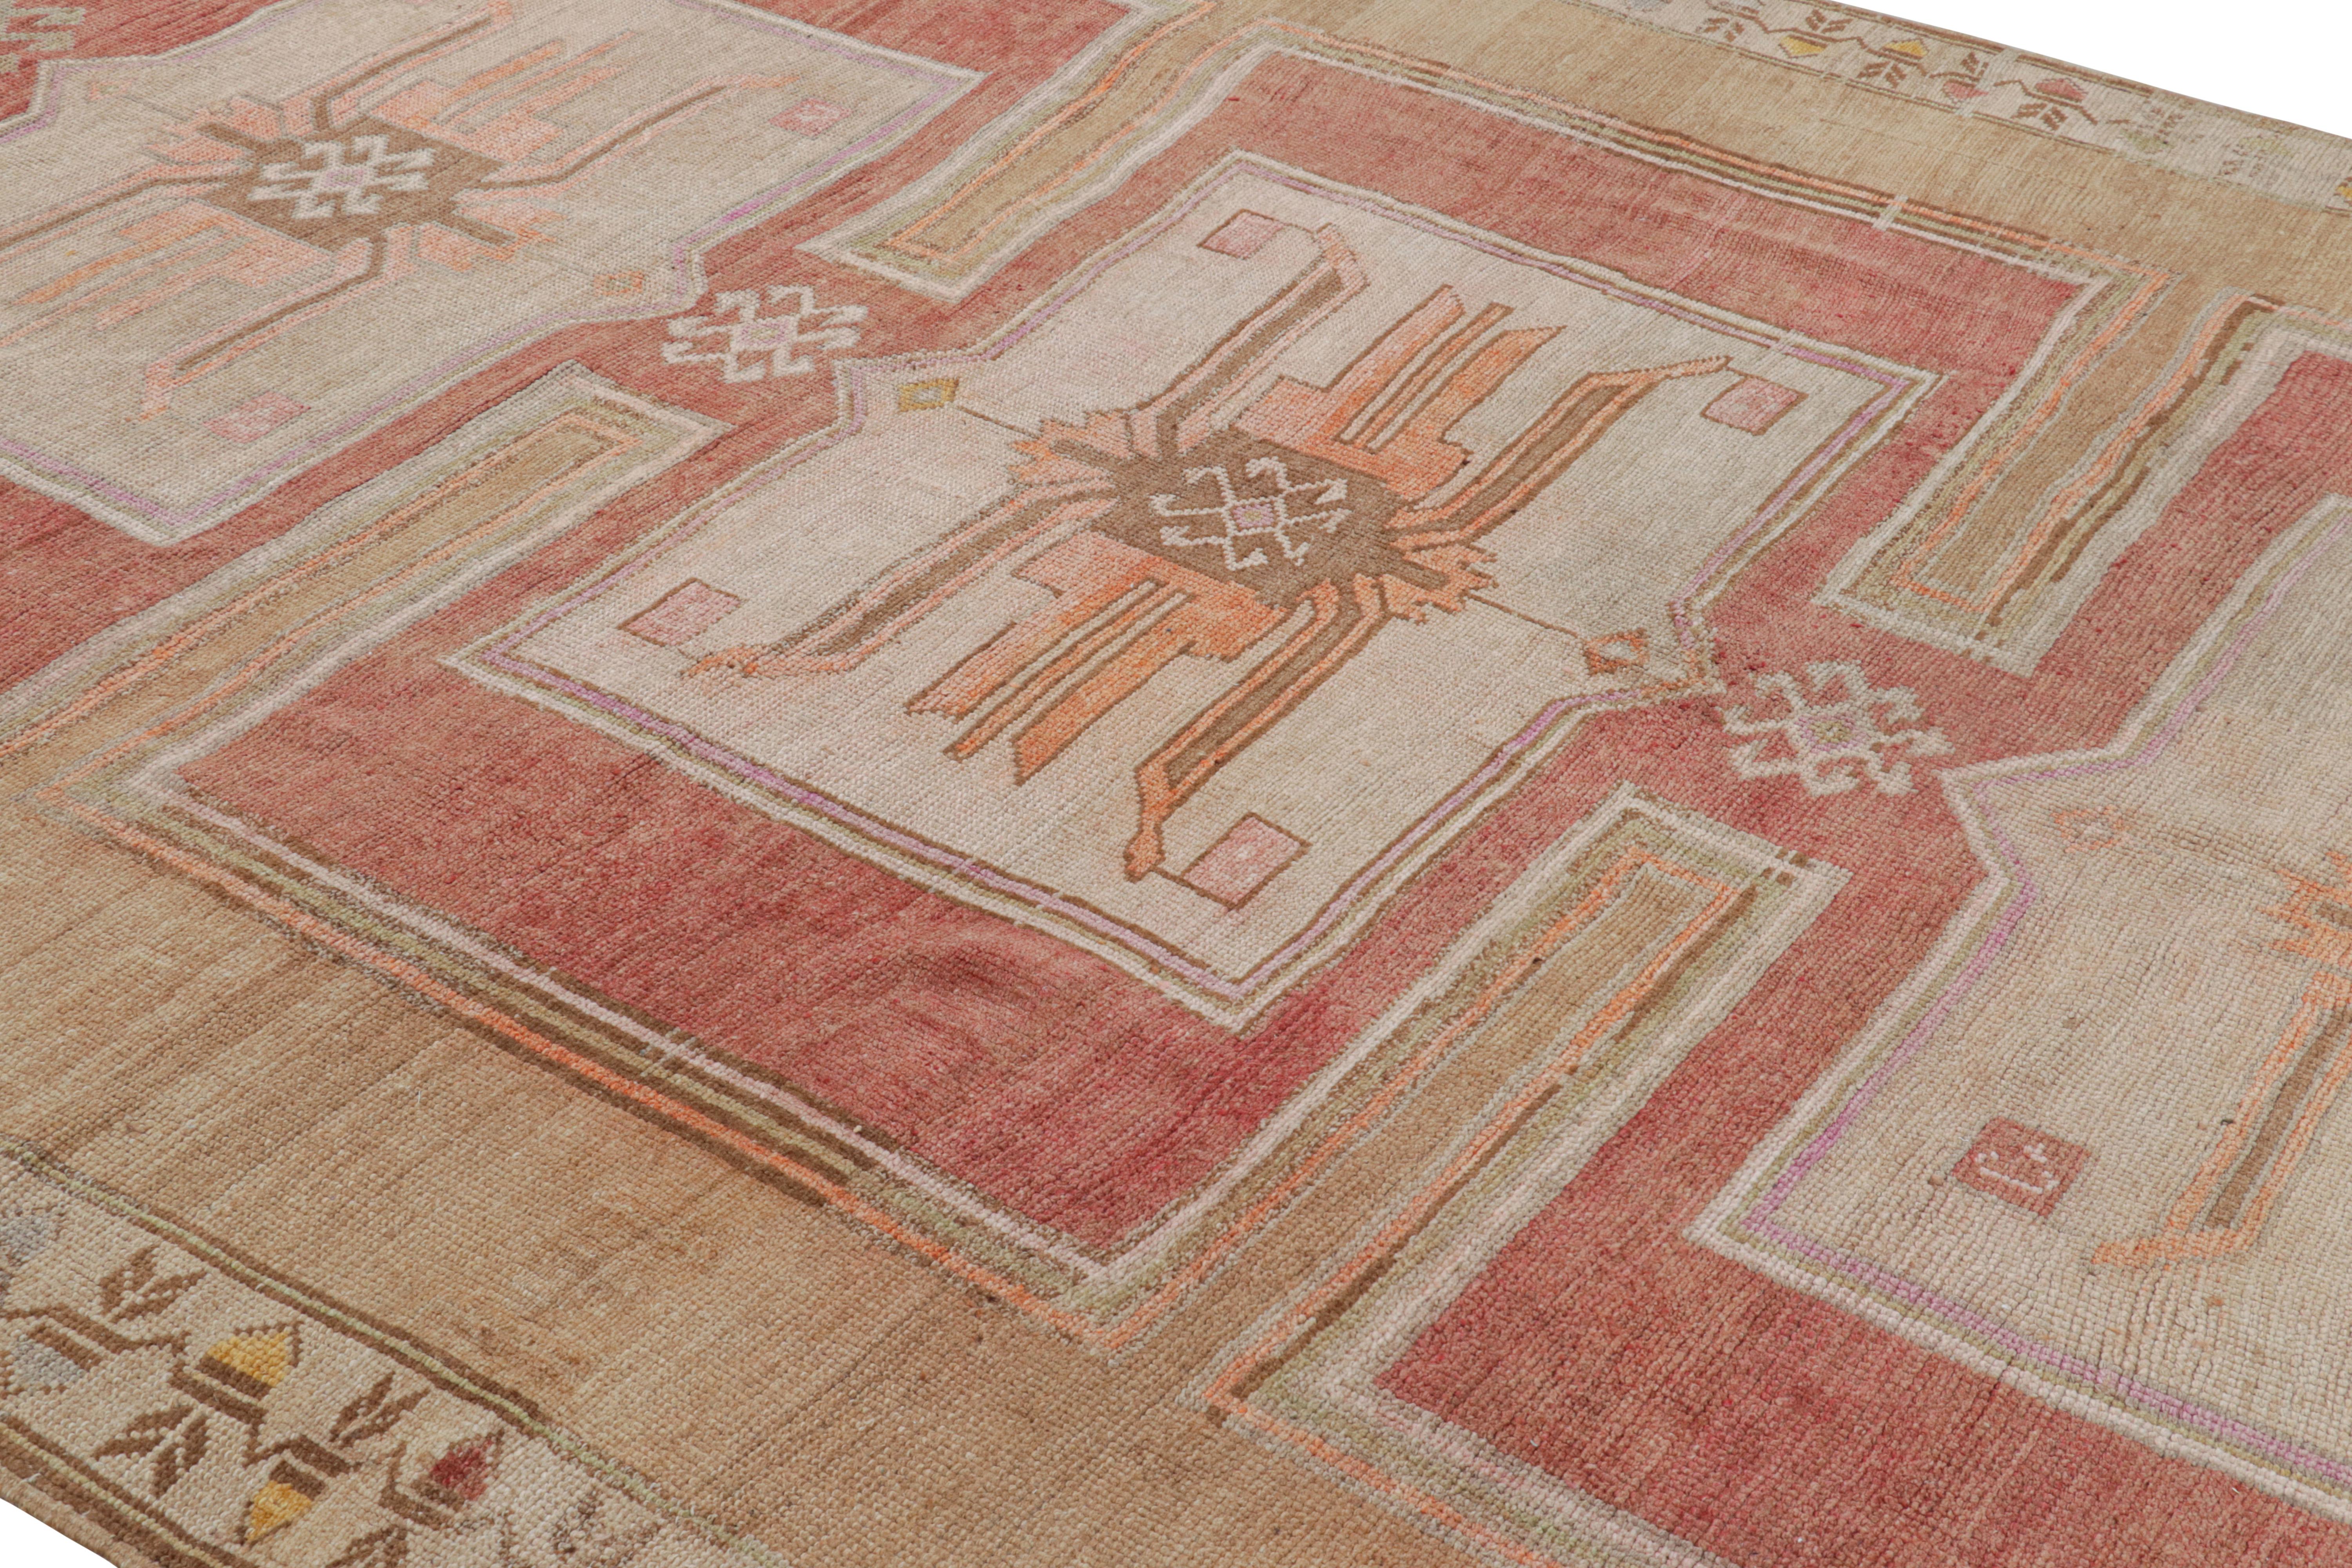 Hand Knotted in wool, this vintage 9x14 Turkish Oushak rug features prominent medallions and geometric patterns on a beige-brown and red field. 

On the Design: 

Connoisseurs will admire this personal vintage piece meant to catch the eye, yet still